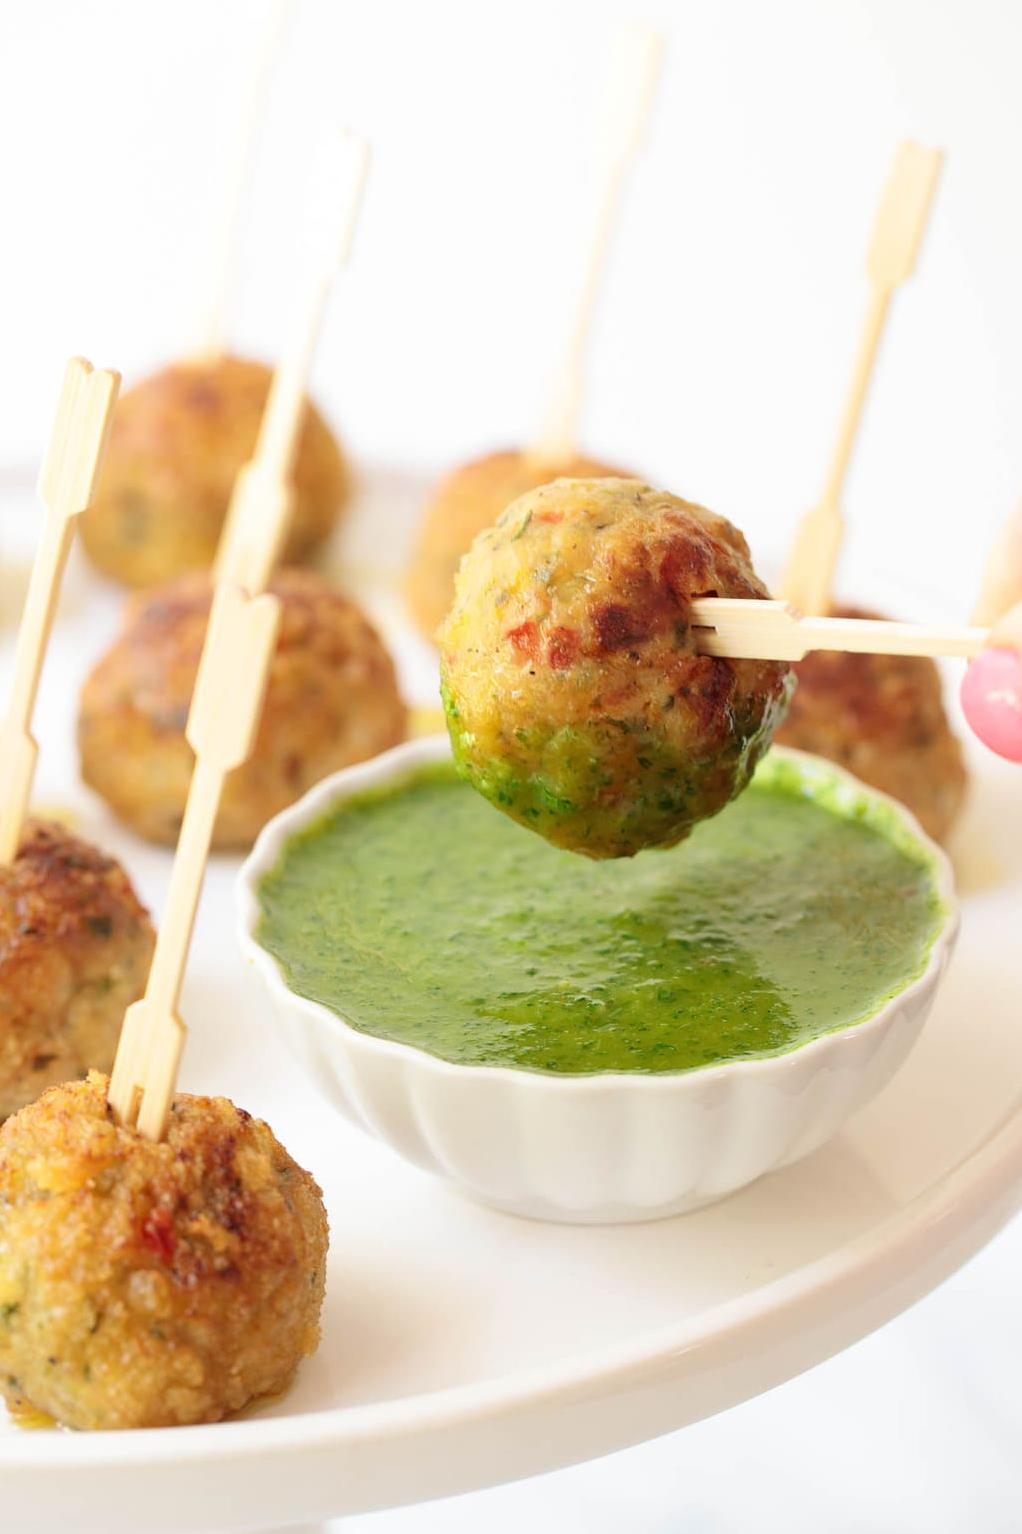  These meatballs are a great addition to any party platter or finger food spread.